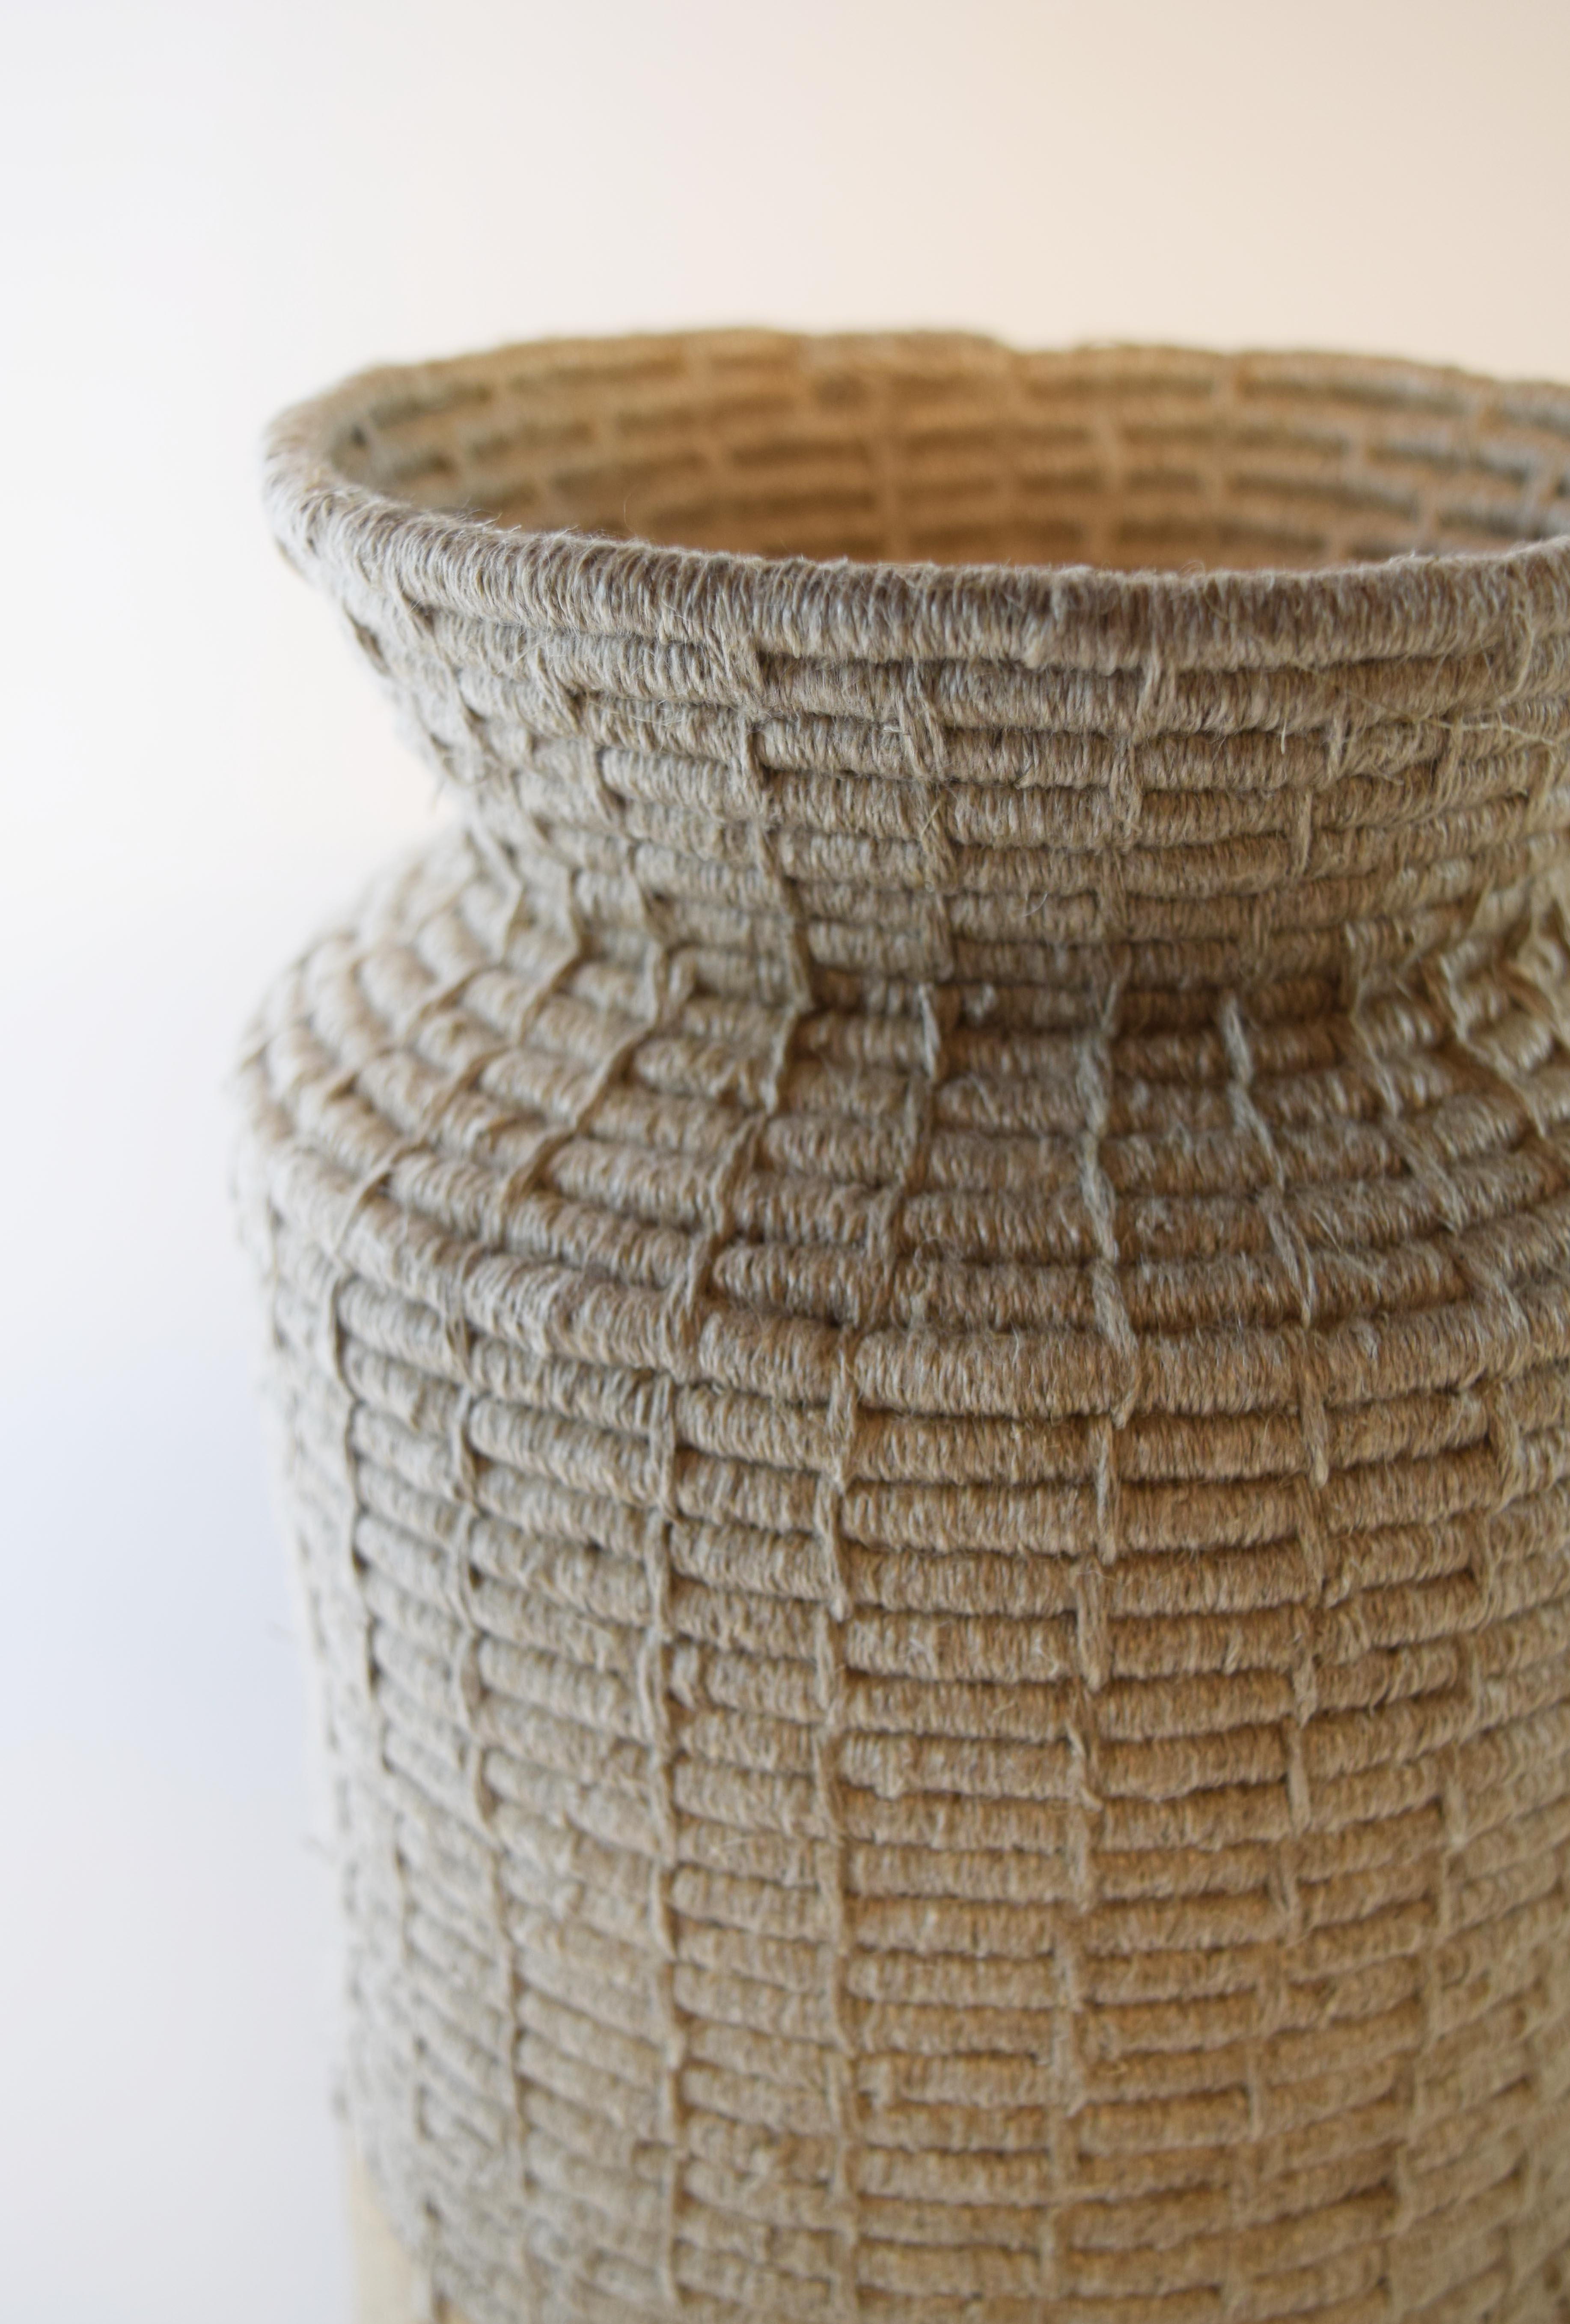 American One of a Kind Ceramic & Fiber Vessel #763 - Speckled Clay, Woven Natural Linen